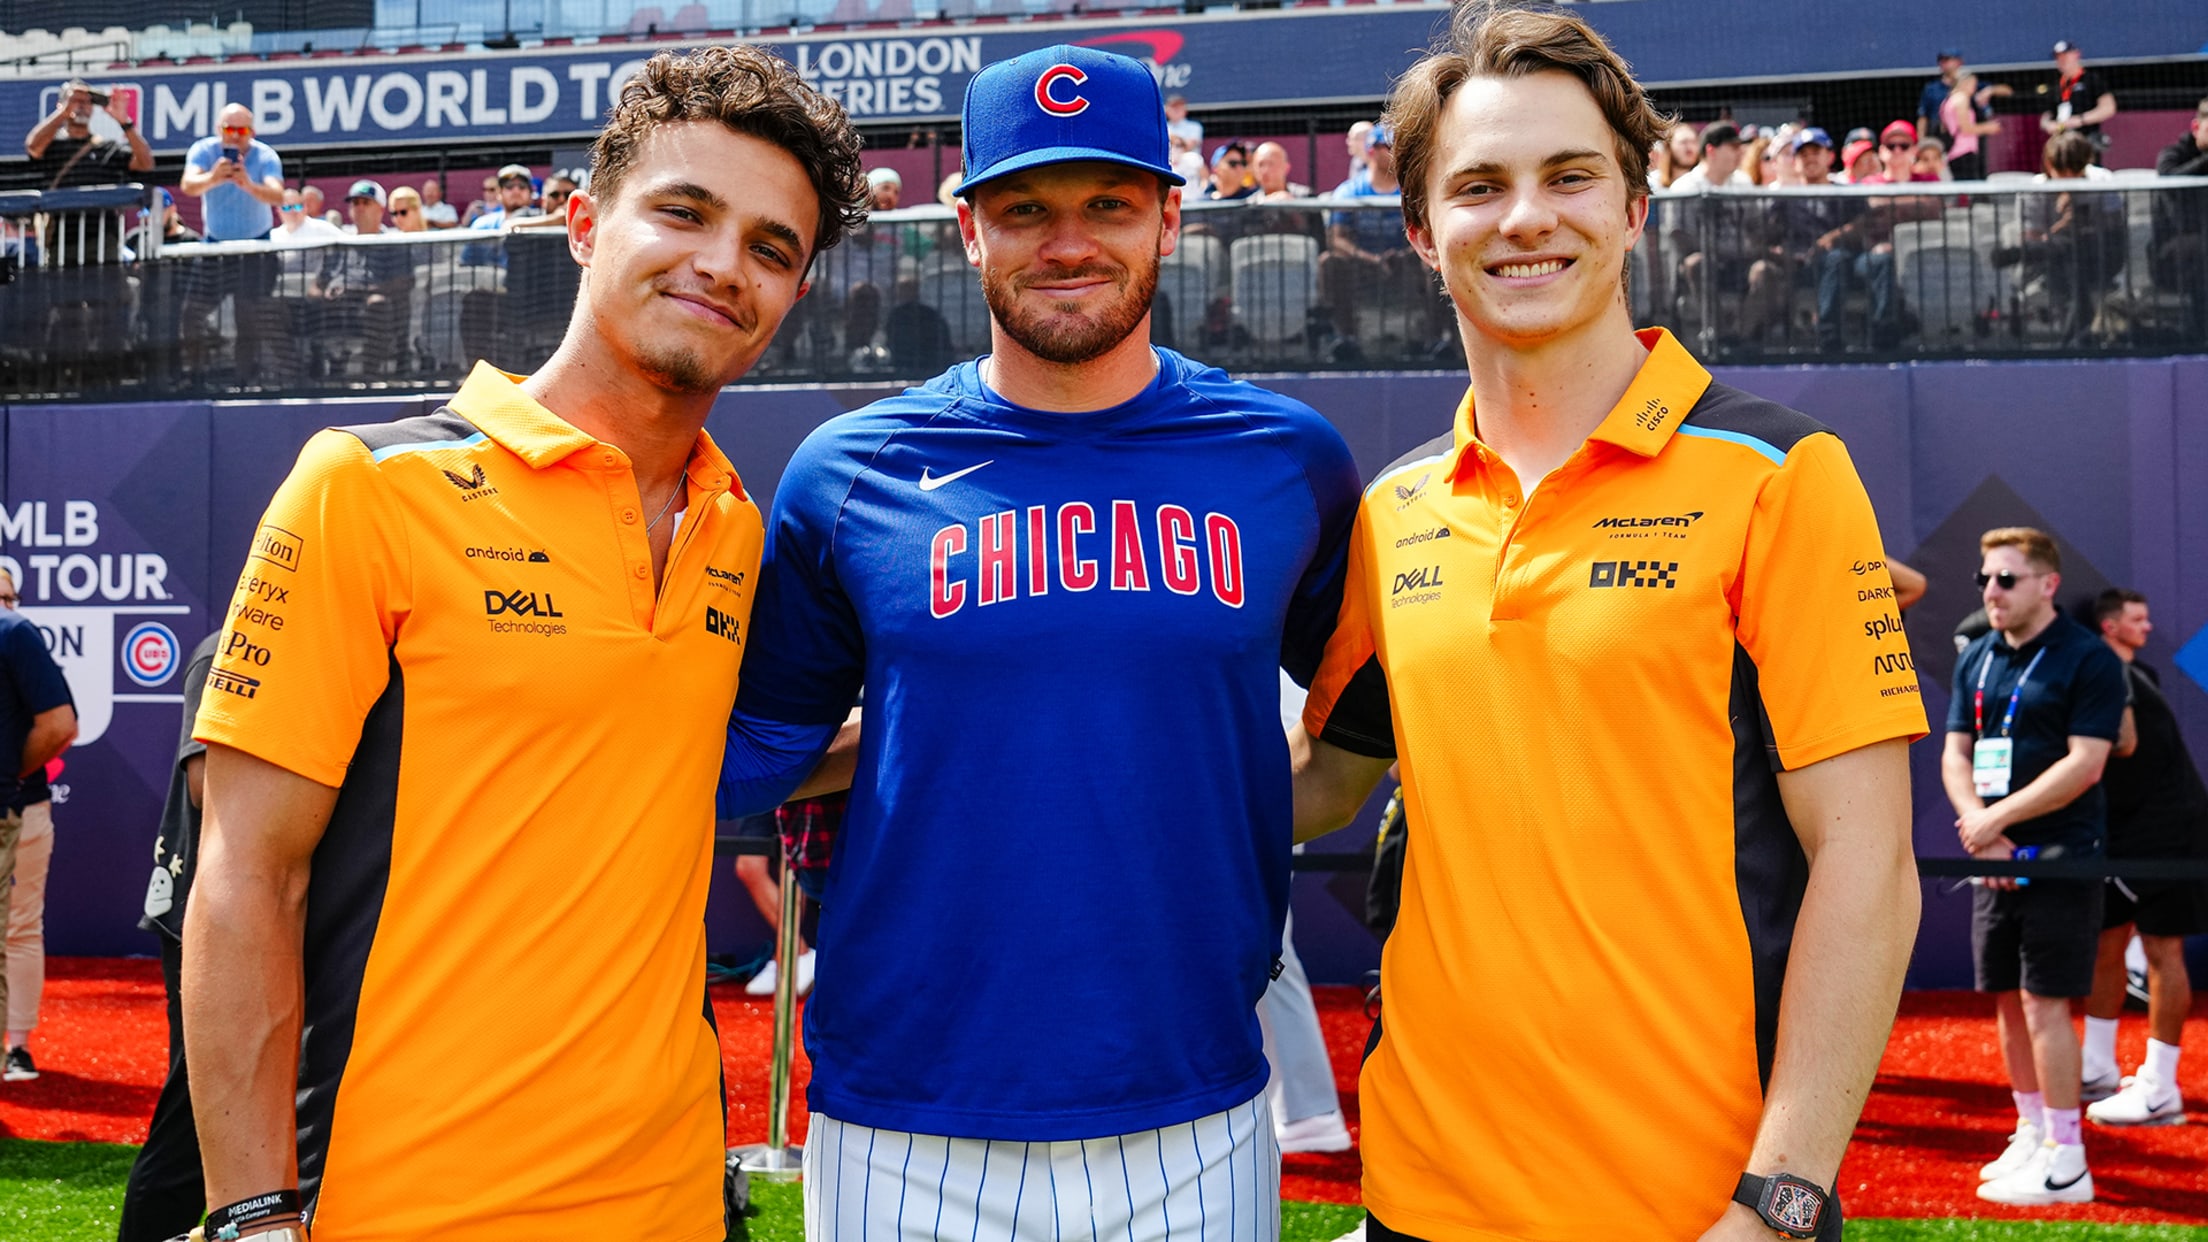 Ian Happ of the Cubs is flanked by Formula 1 drivers Oscar Piastri and Lando Norris